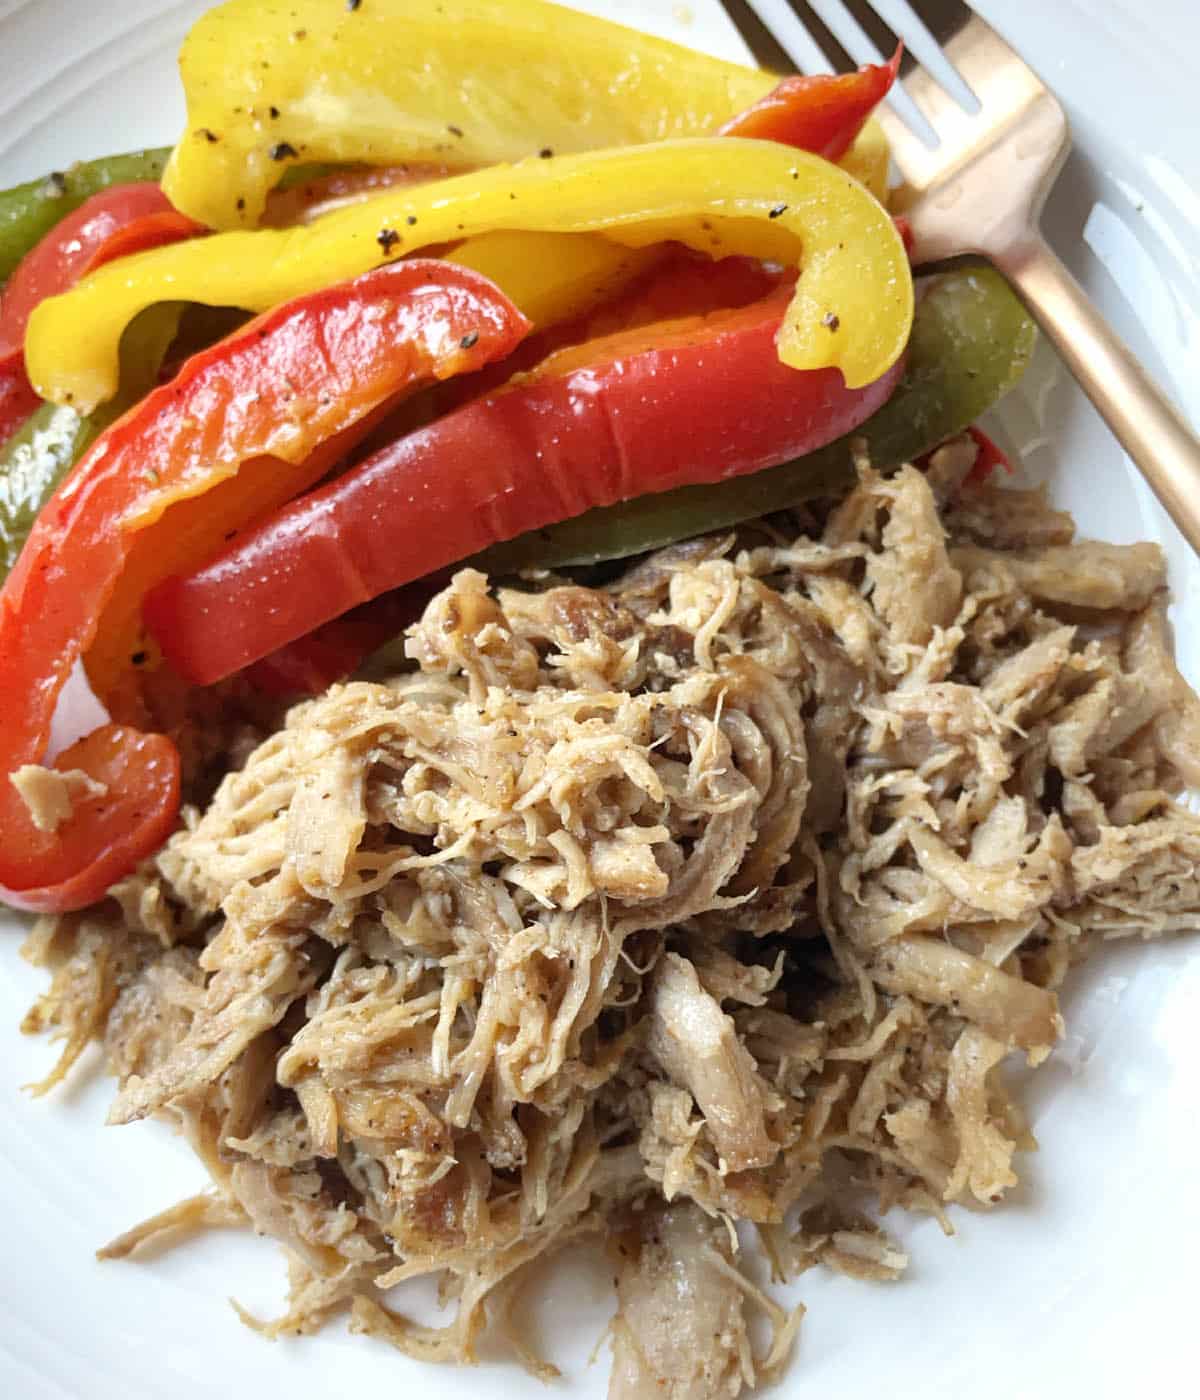 A white dish containing a fork, pulled pork, and slices of red, green, and yello bell peppers.